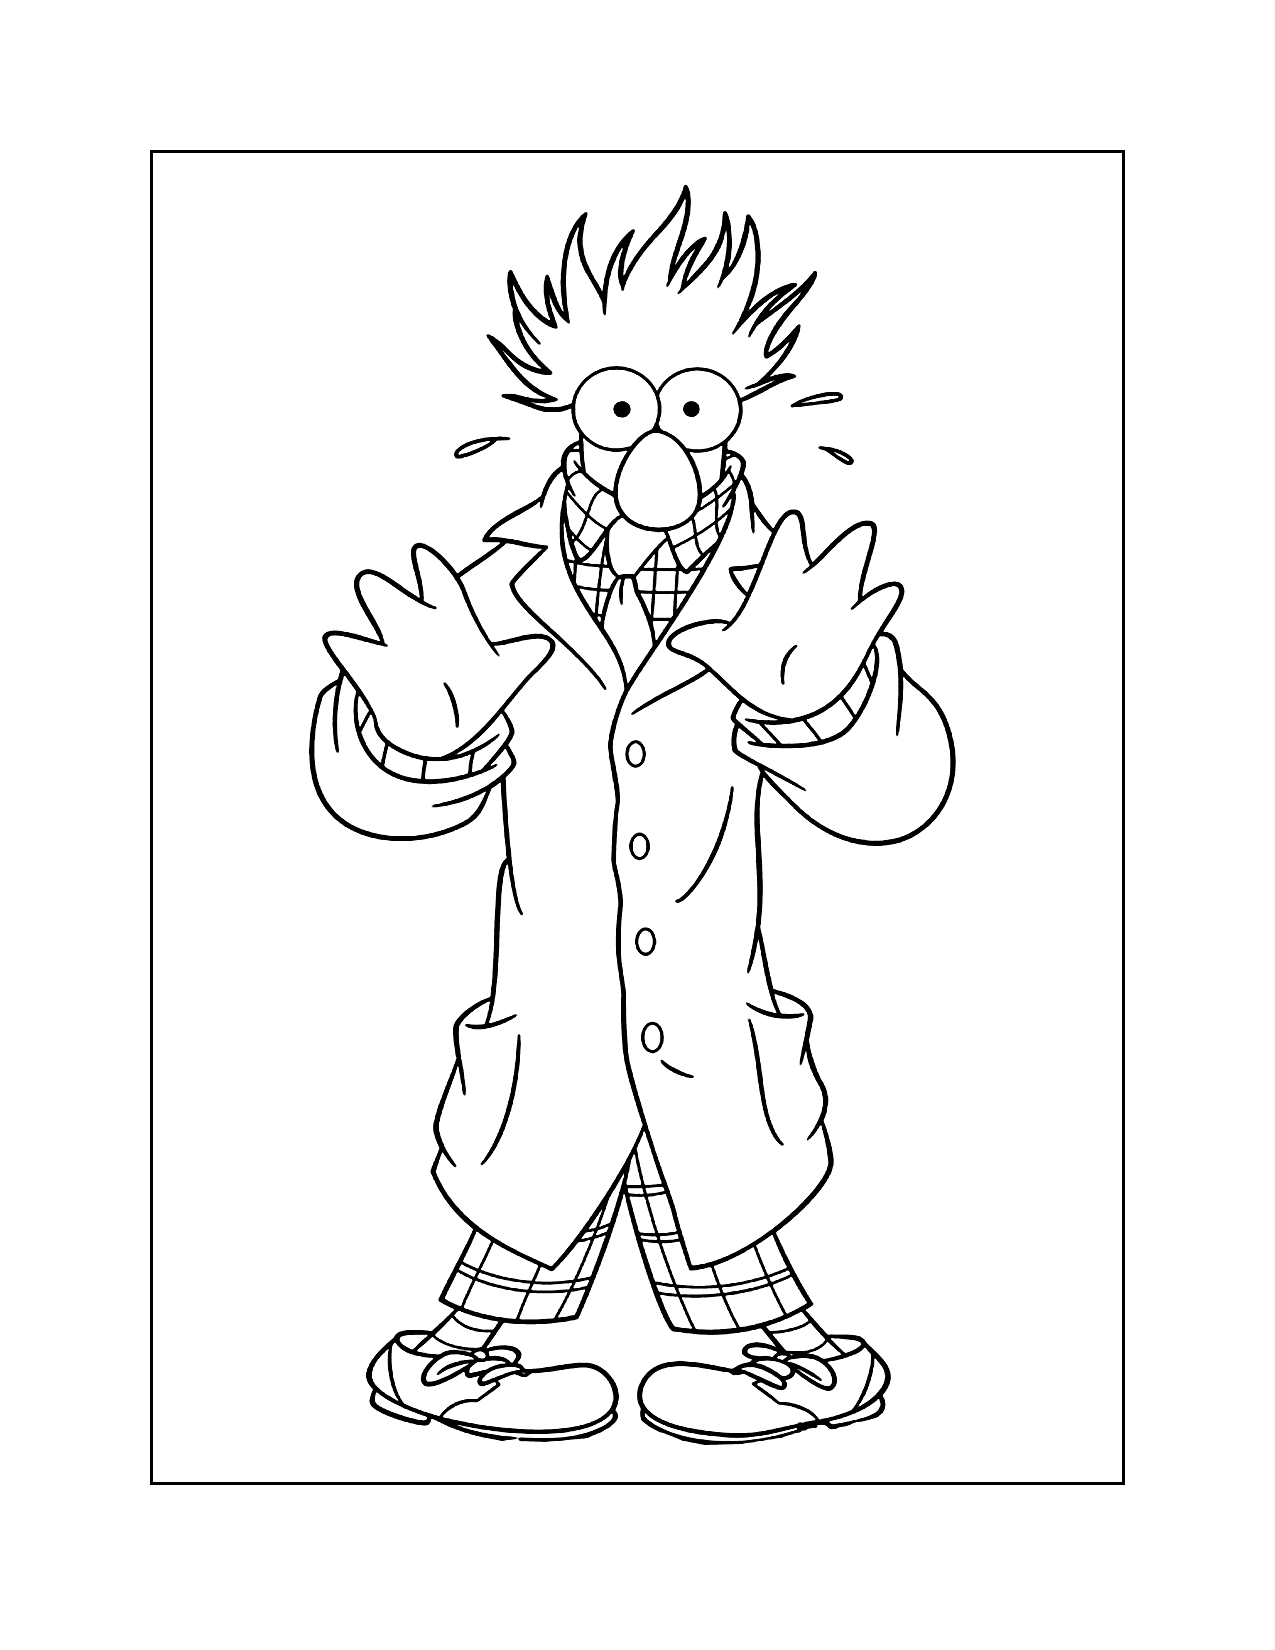 Beaker Muppet Show Coloring Page